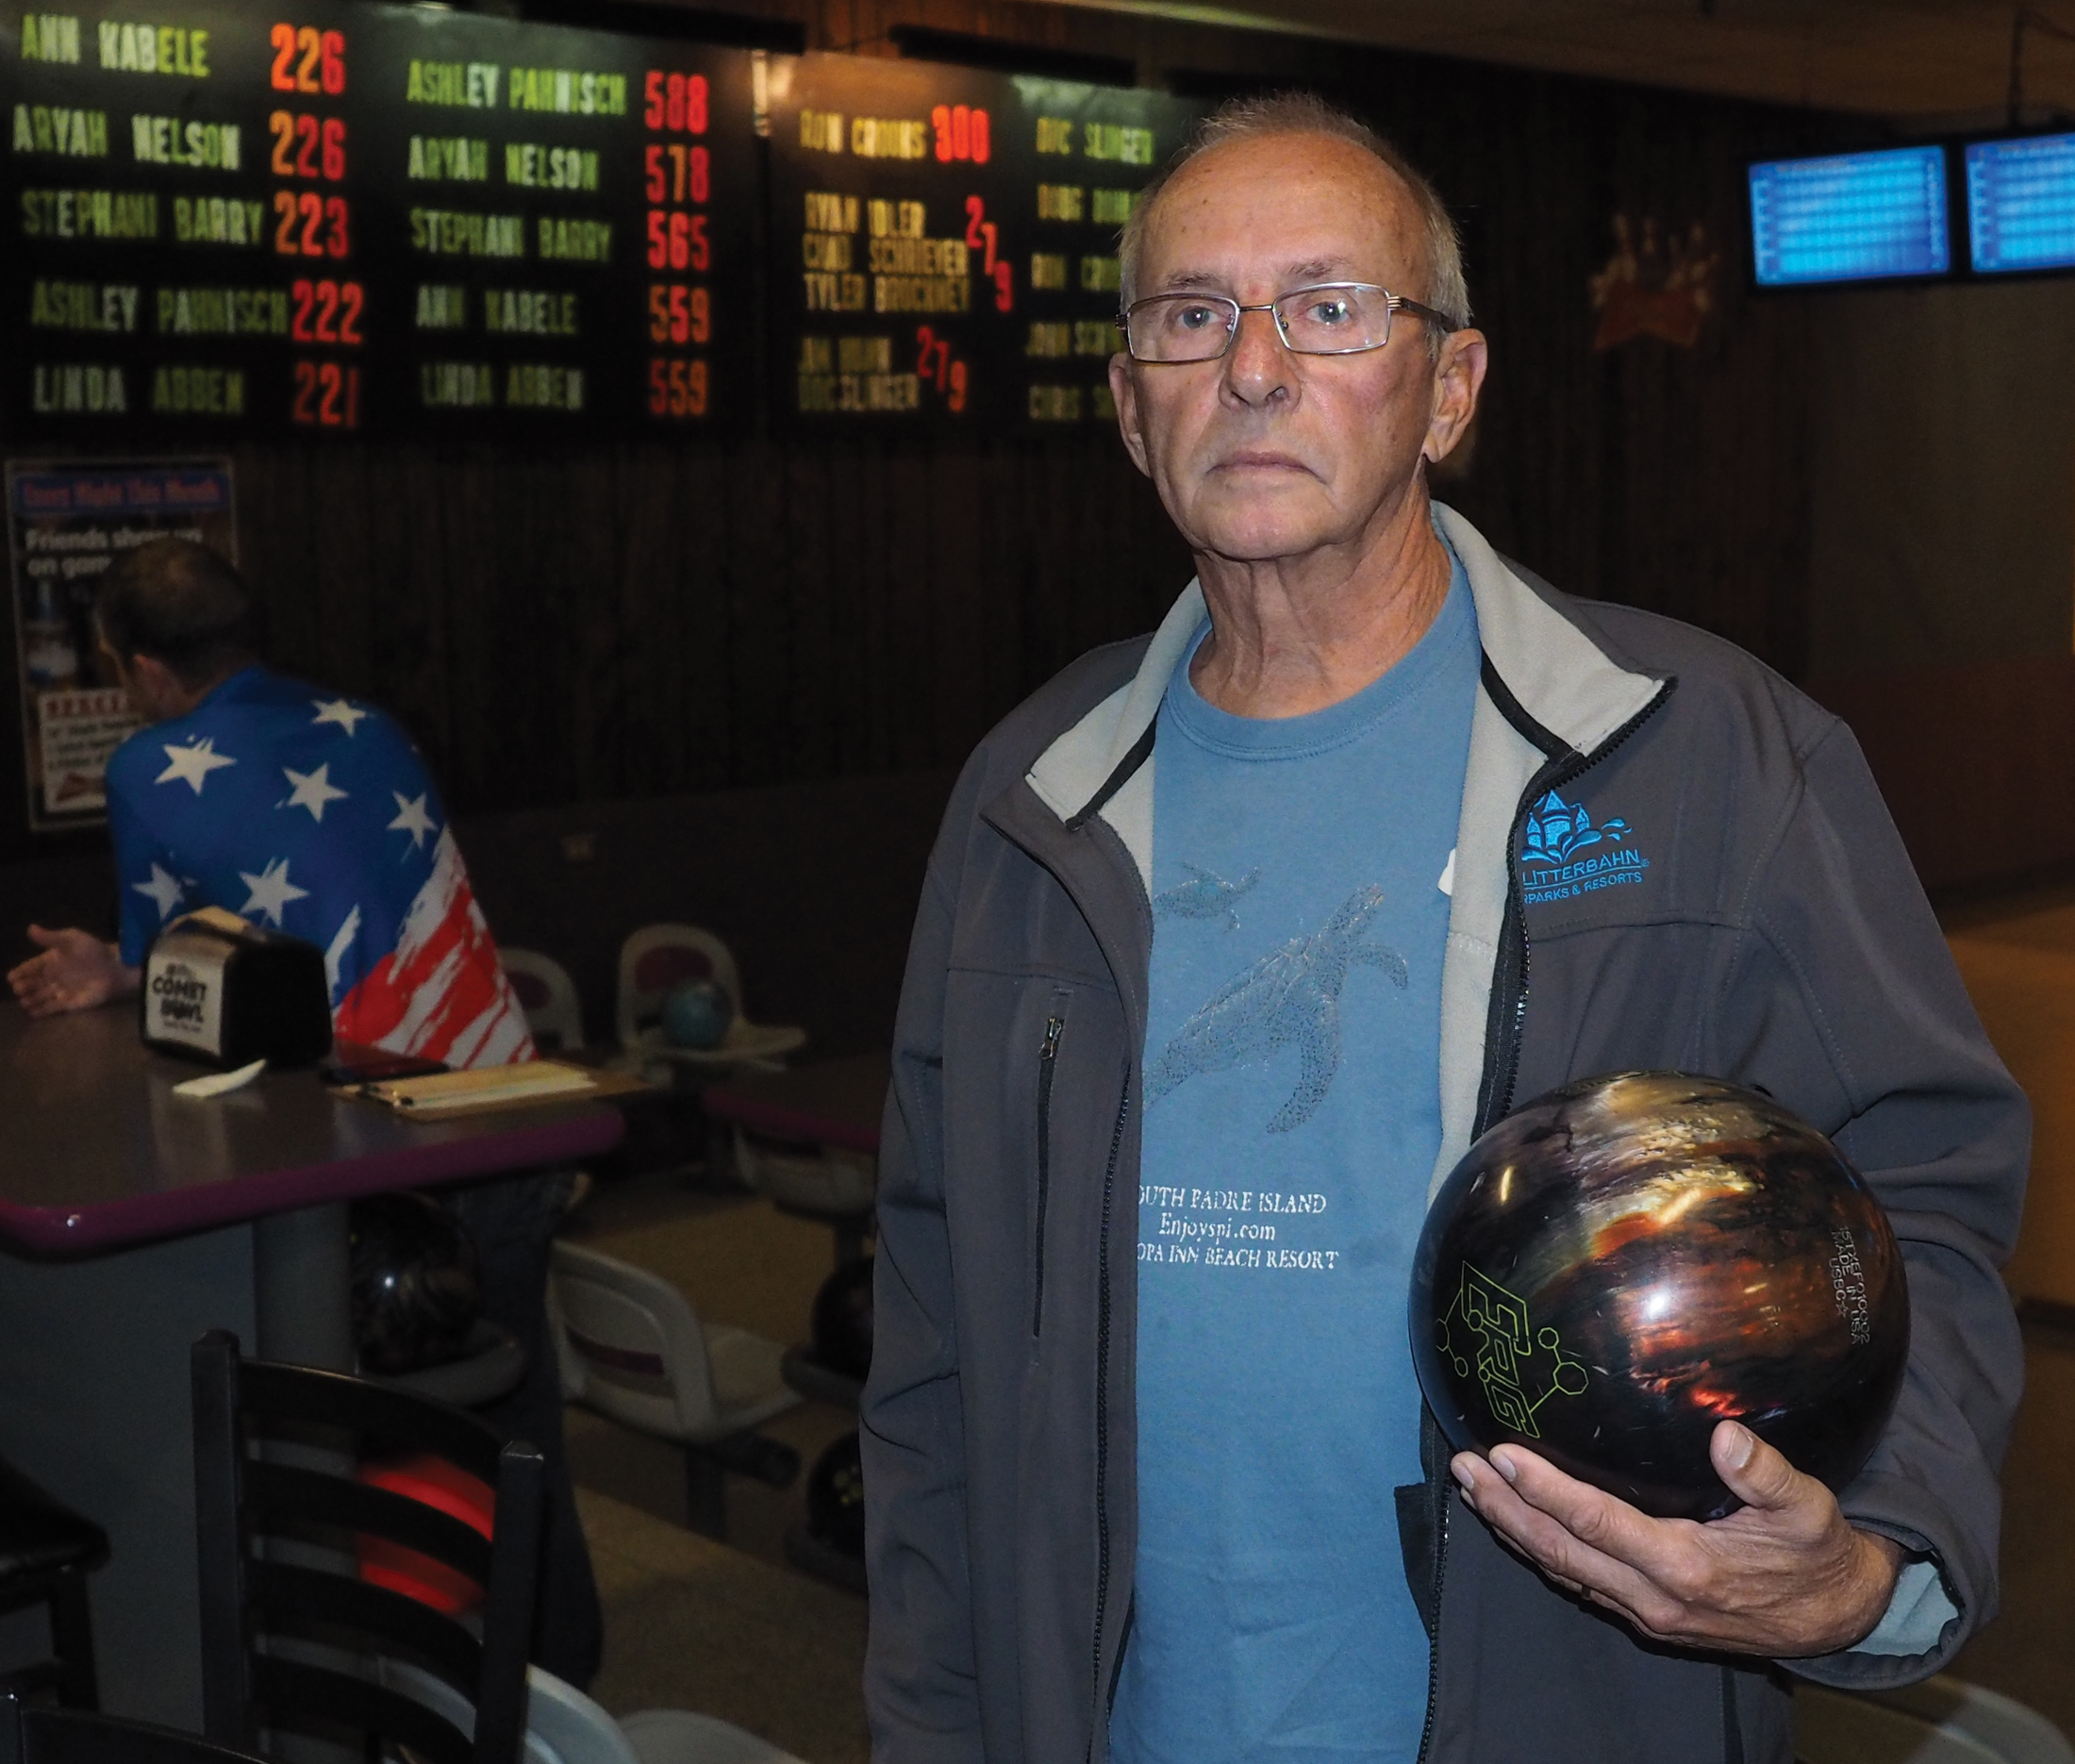 Ron Crooks rolls sixth 300 game in league play